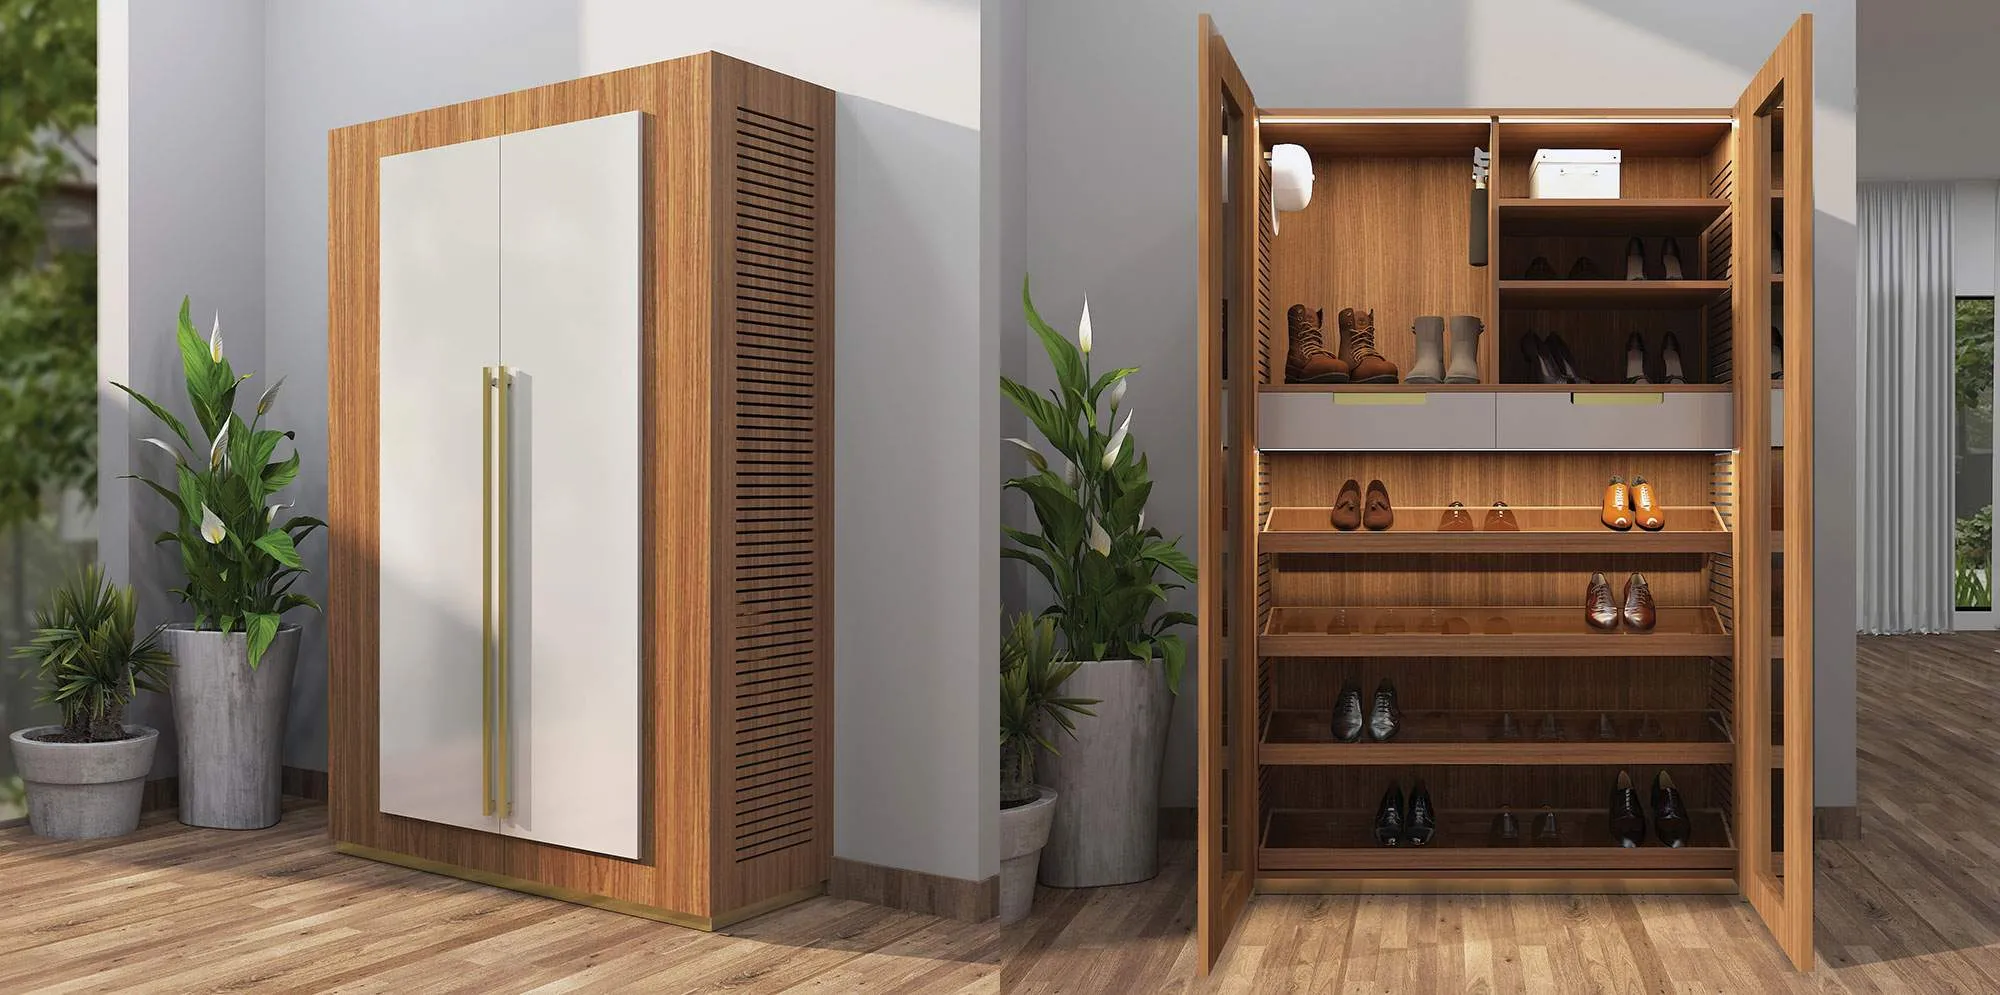 wooden shoe storage unit, closed shoe cabinet, wooden flooring, indoor plant near the furniture, planter